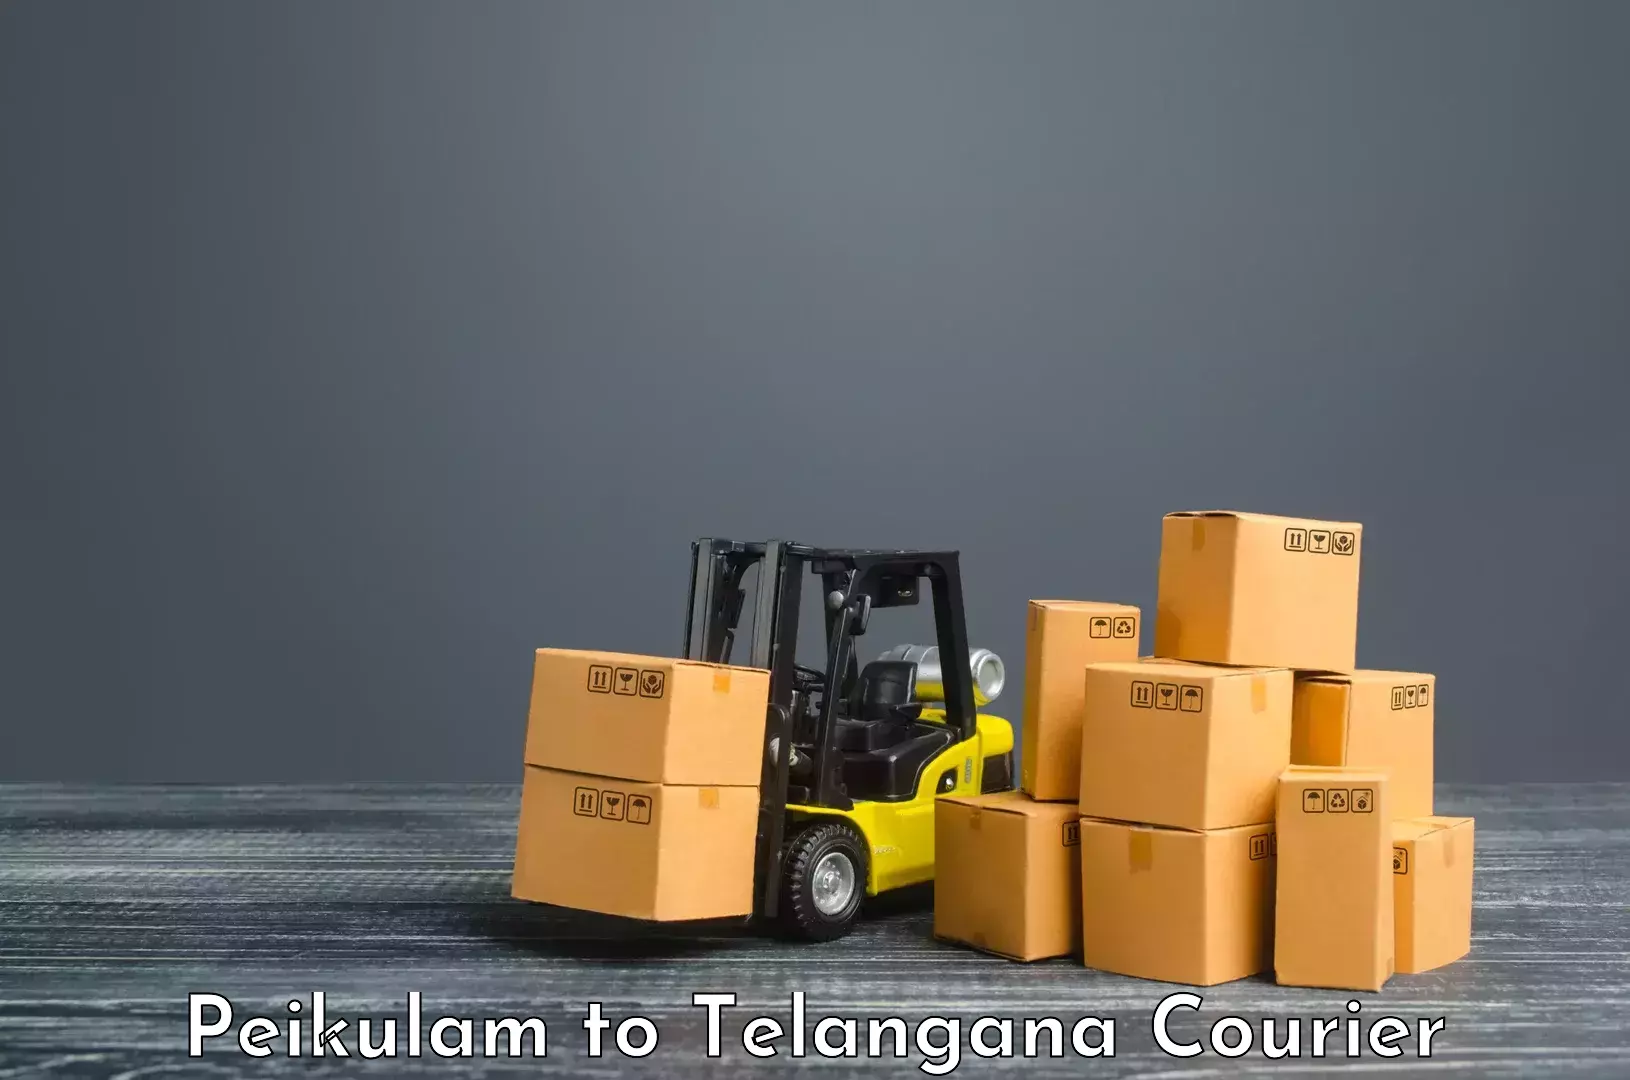 Modern delivery technologies Peikulam to Hyderabad